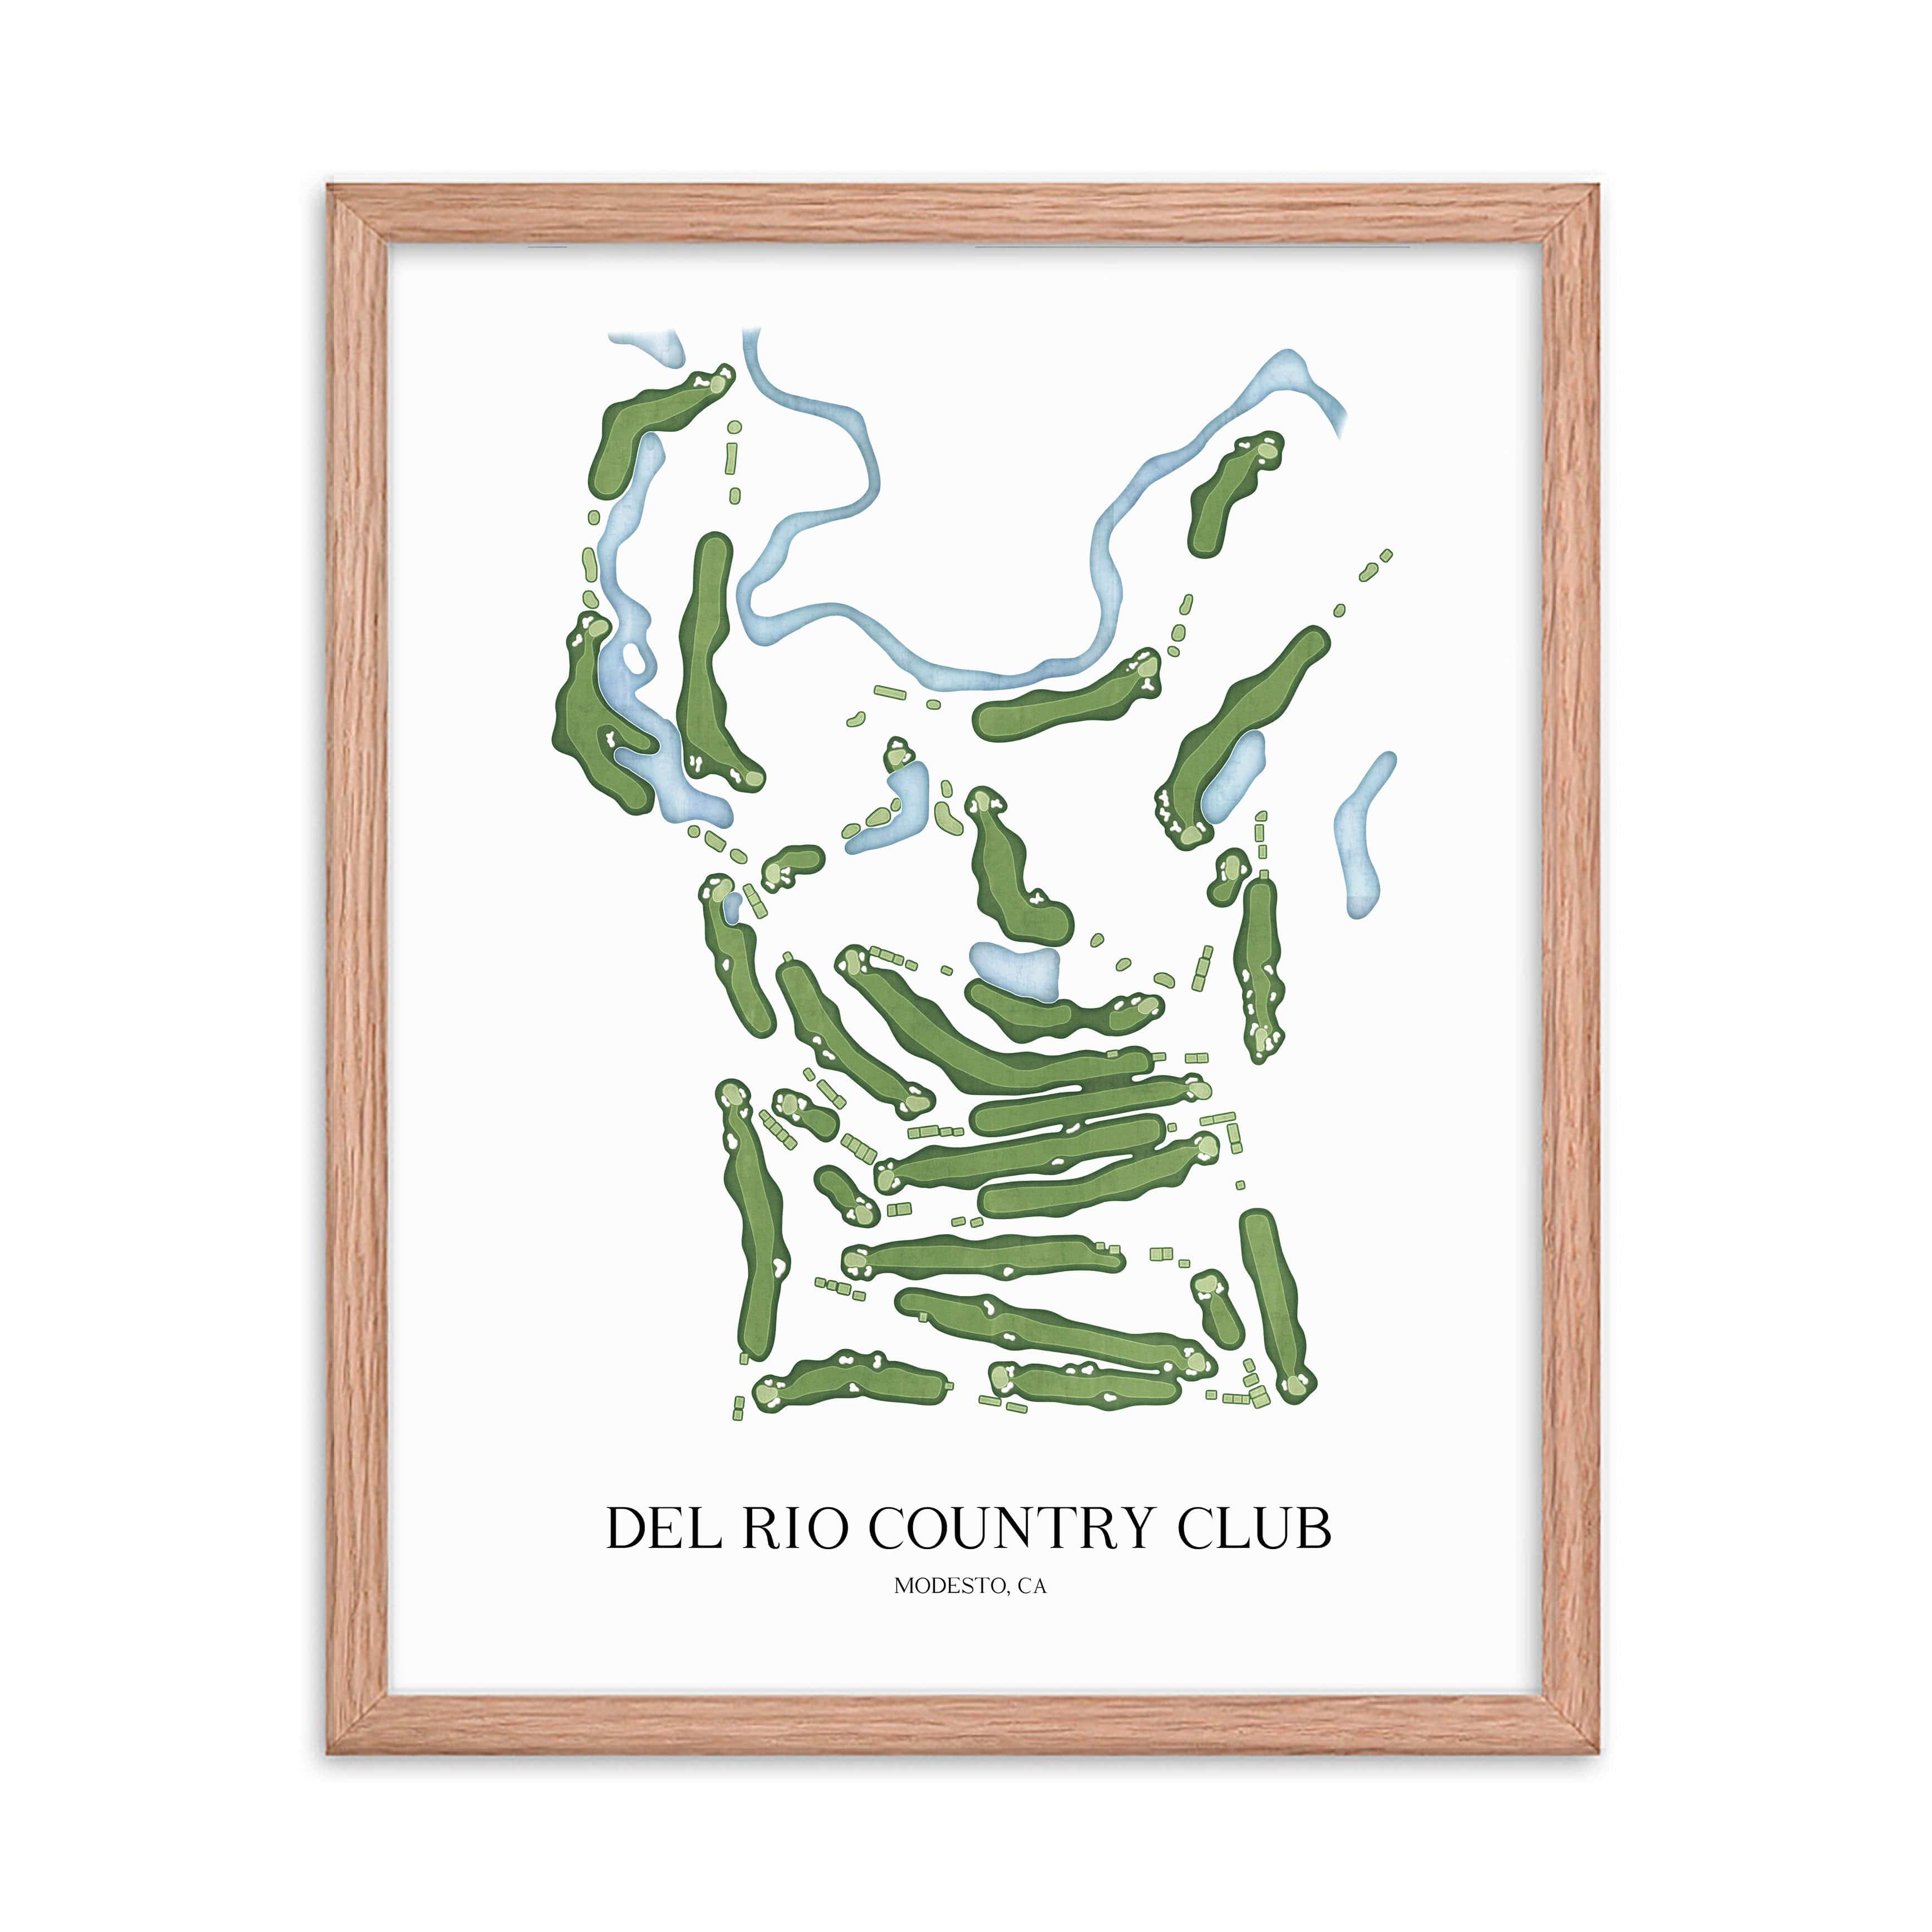 The 19th Hole Golf Shop - Golf Course Prints -  Del Rio Country Club Golf Course Map